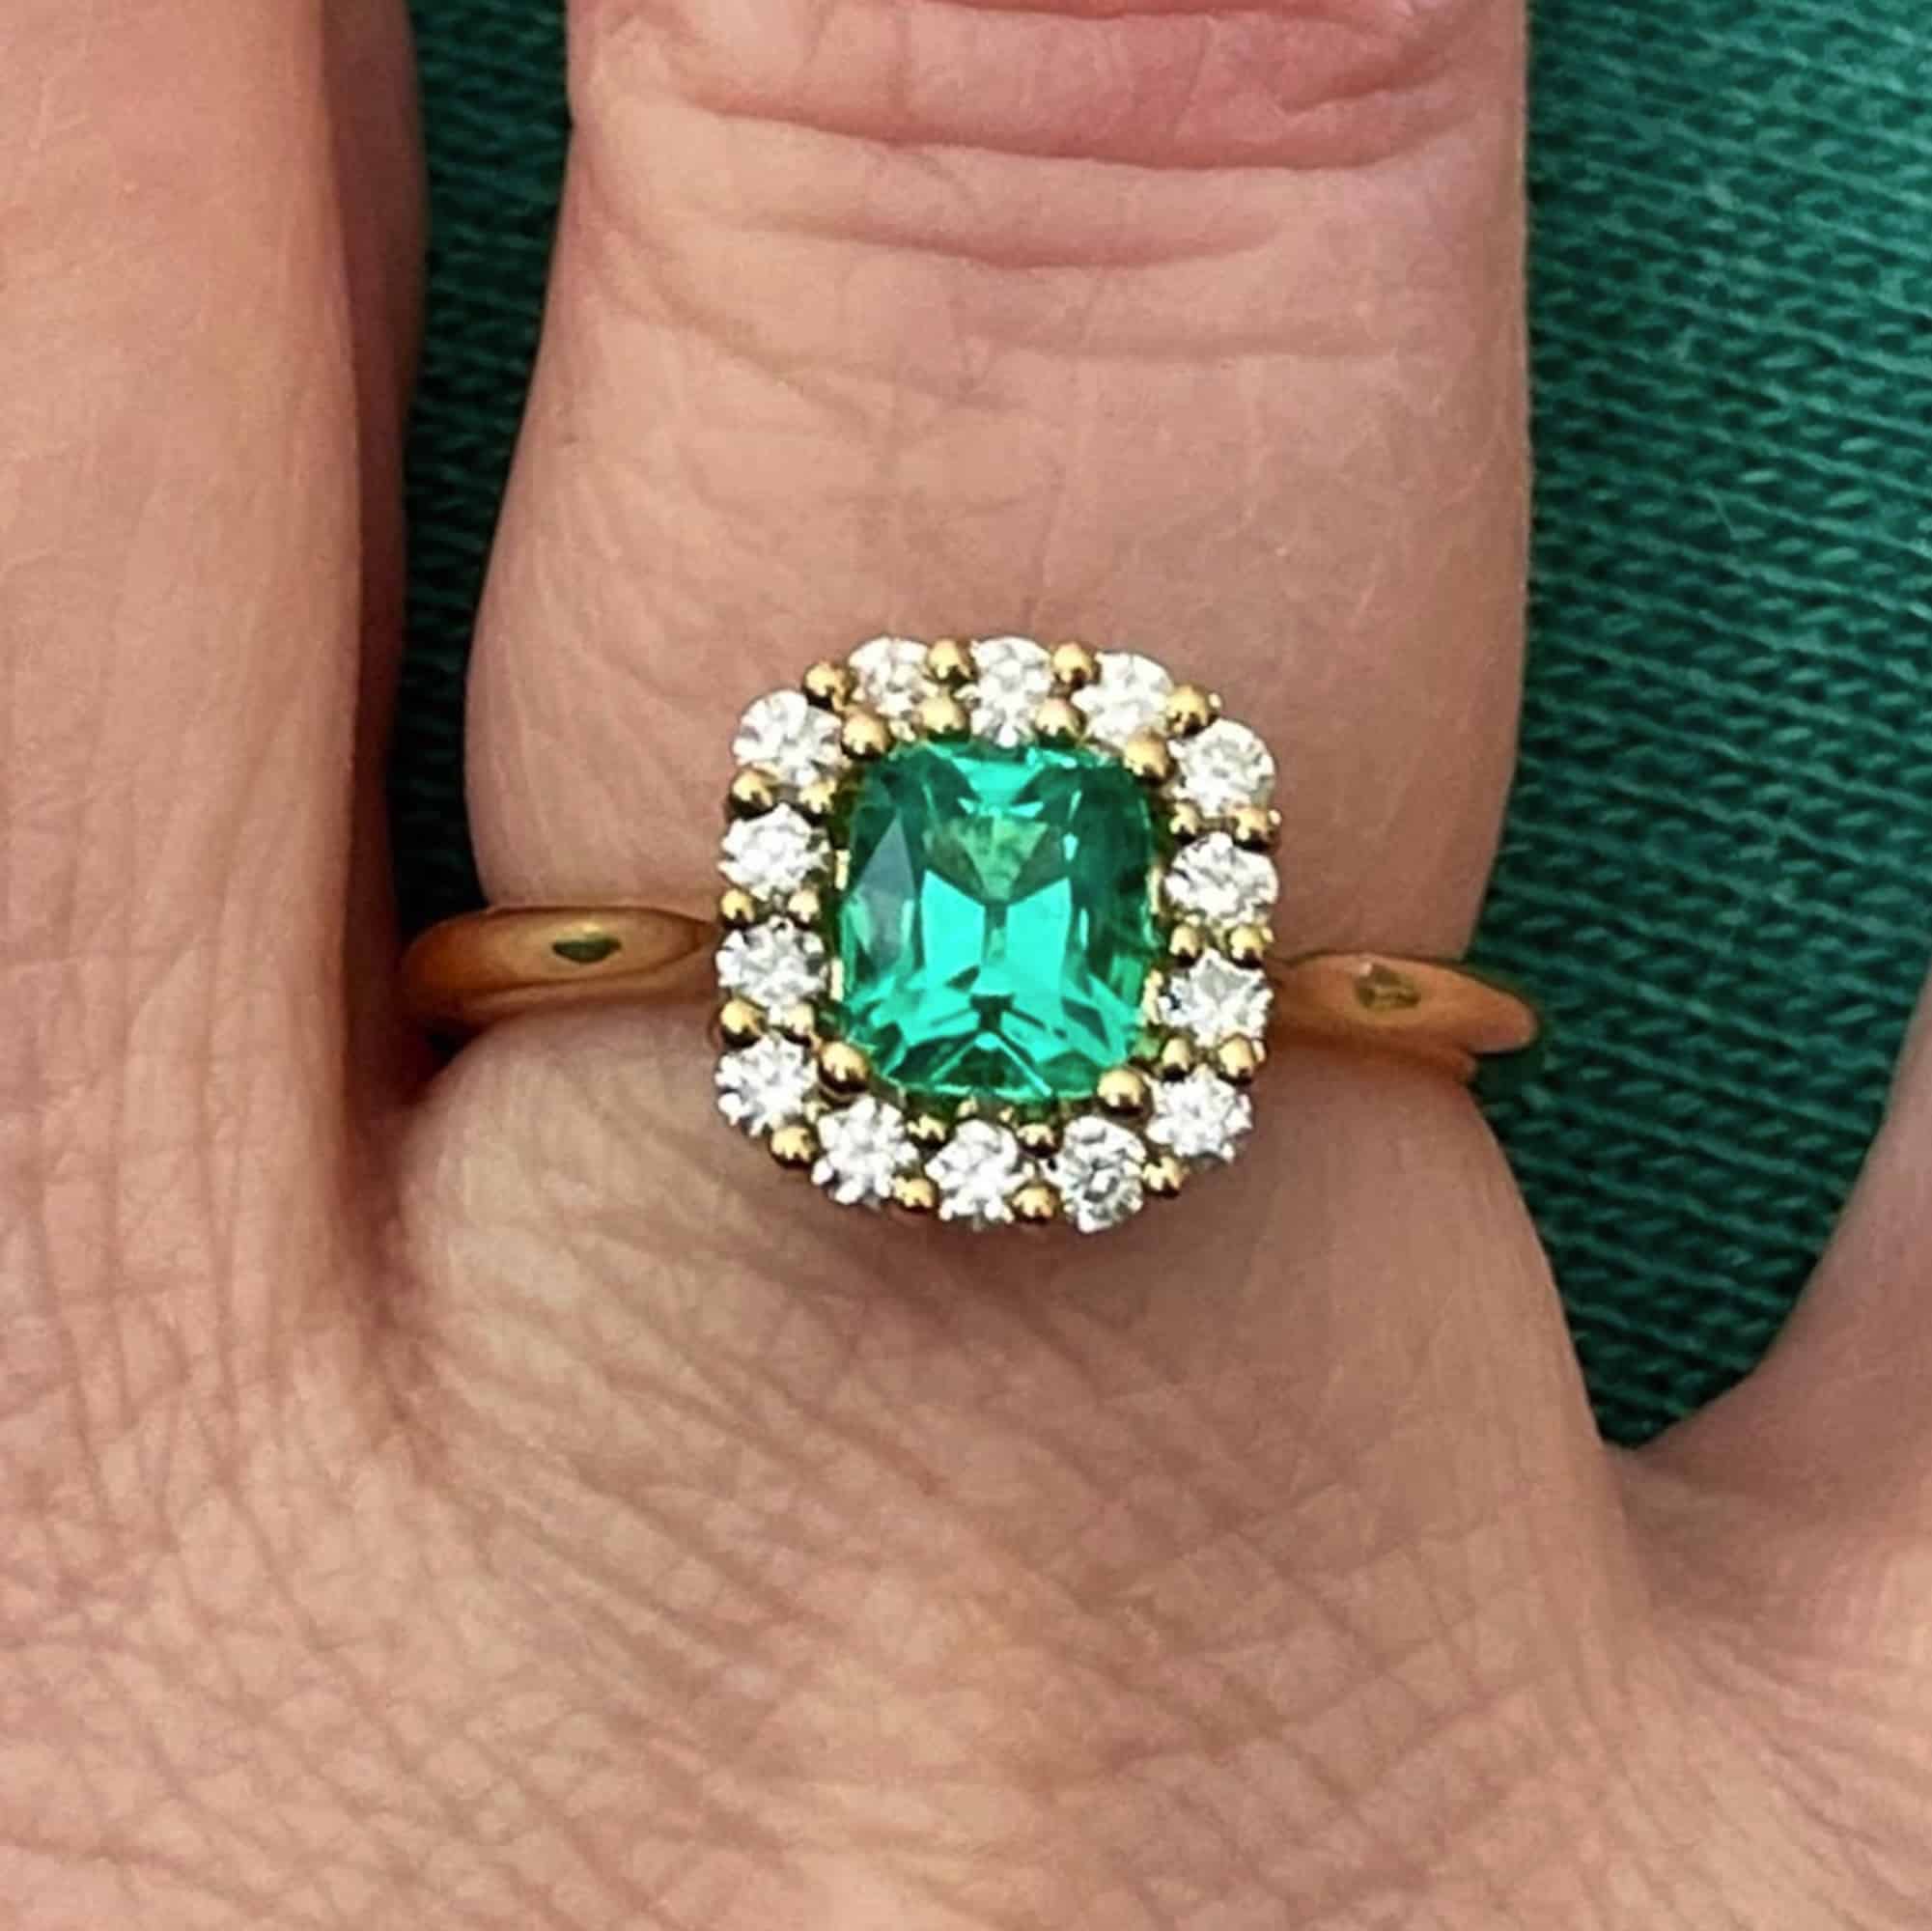 A photo from a customer review showing a yellow gold halo ring with rectangular emerald